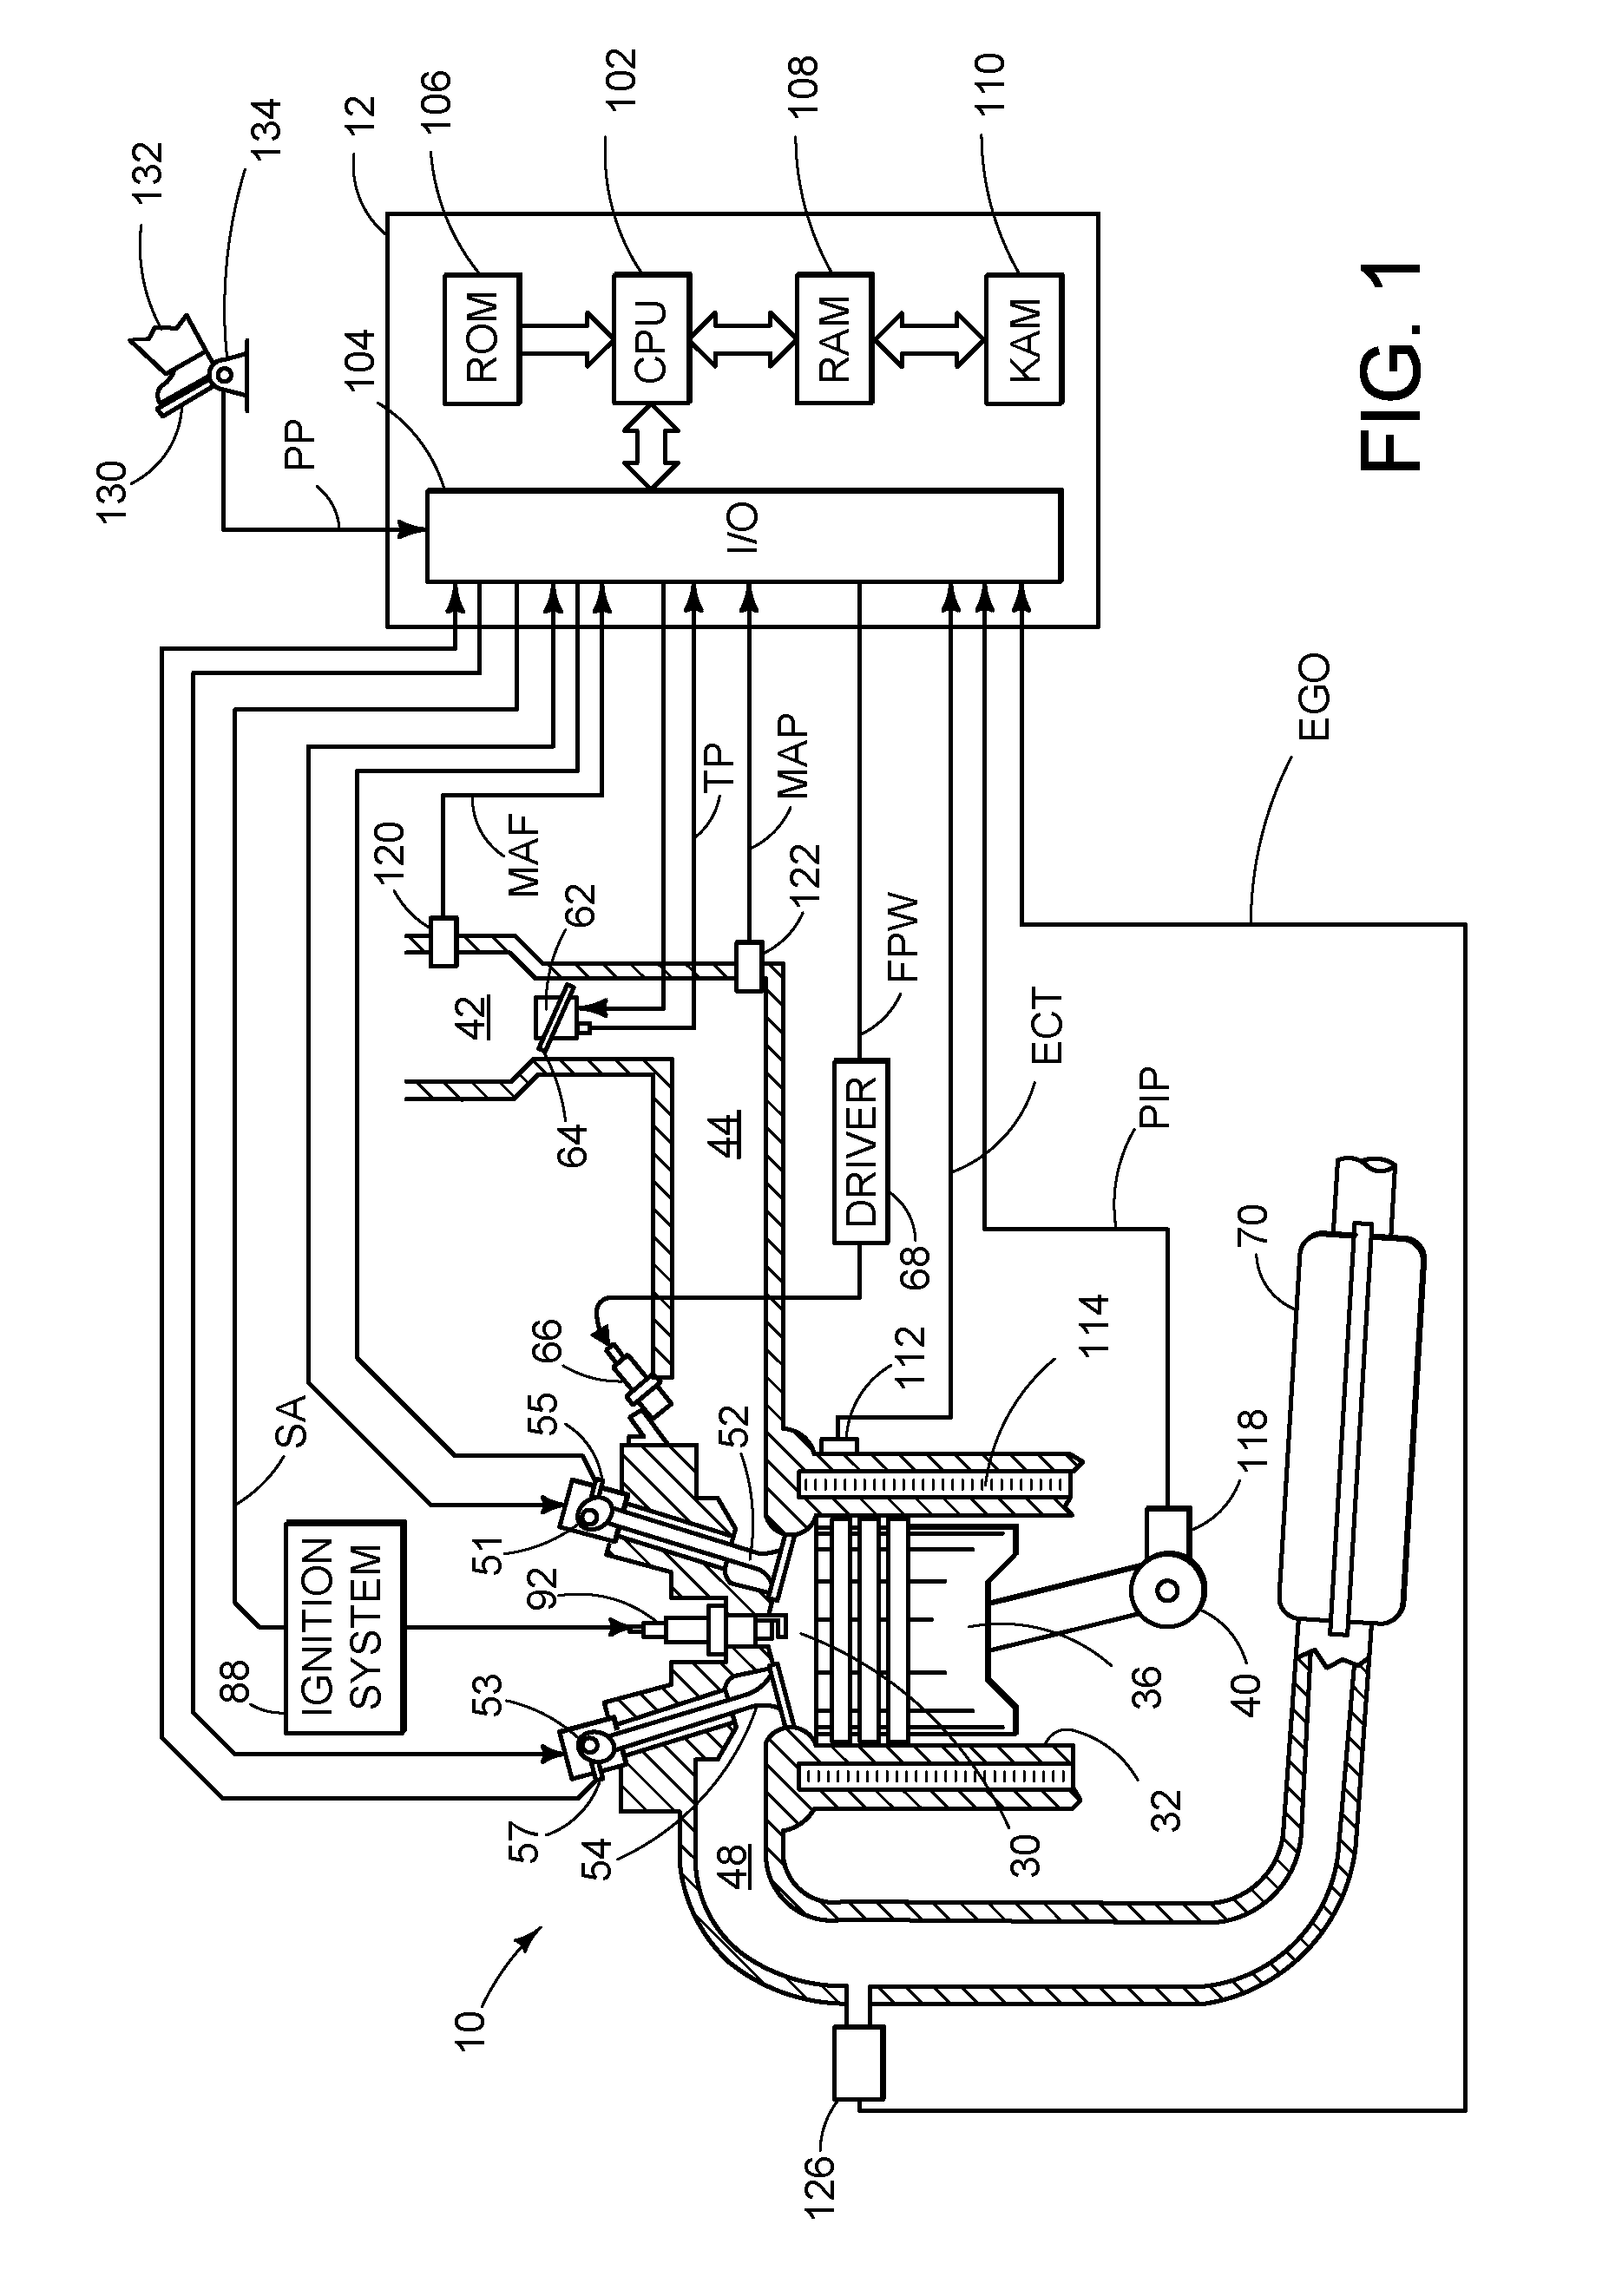 Integrated gaseous fuel delivery system